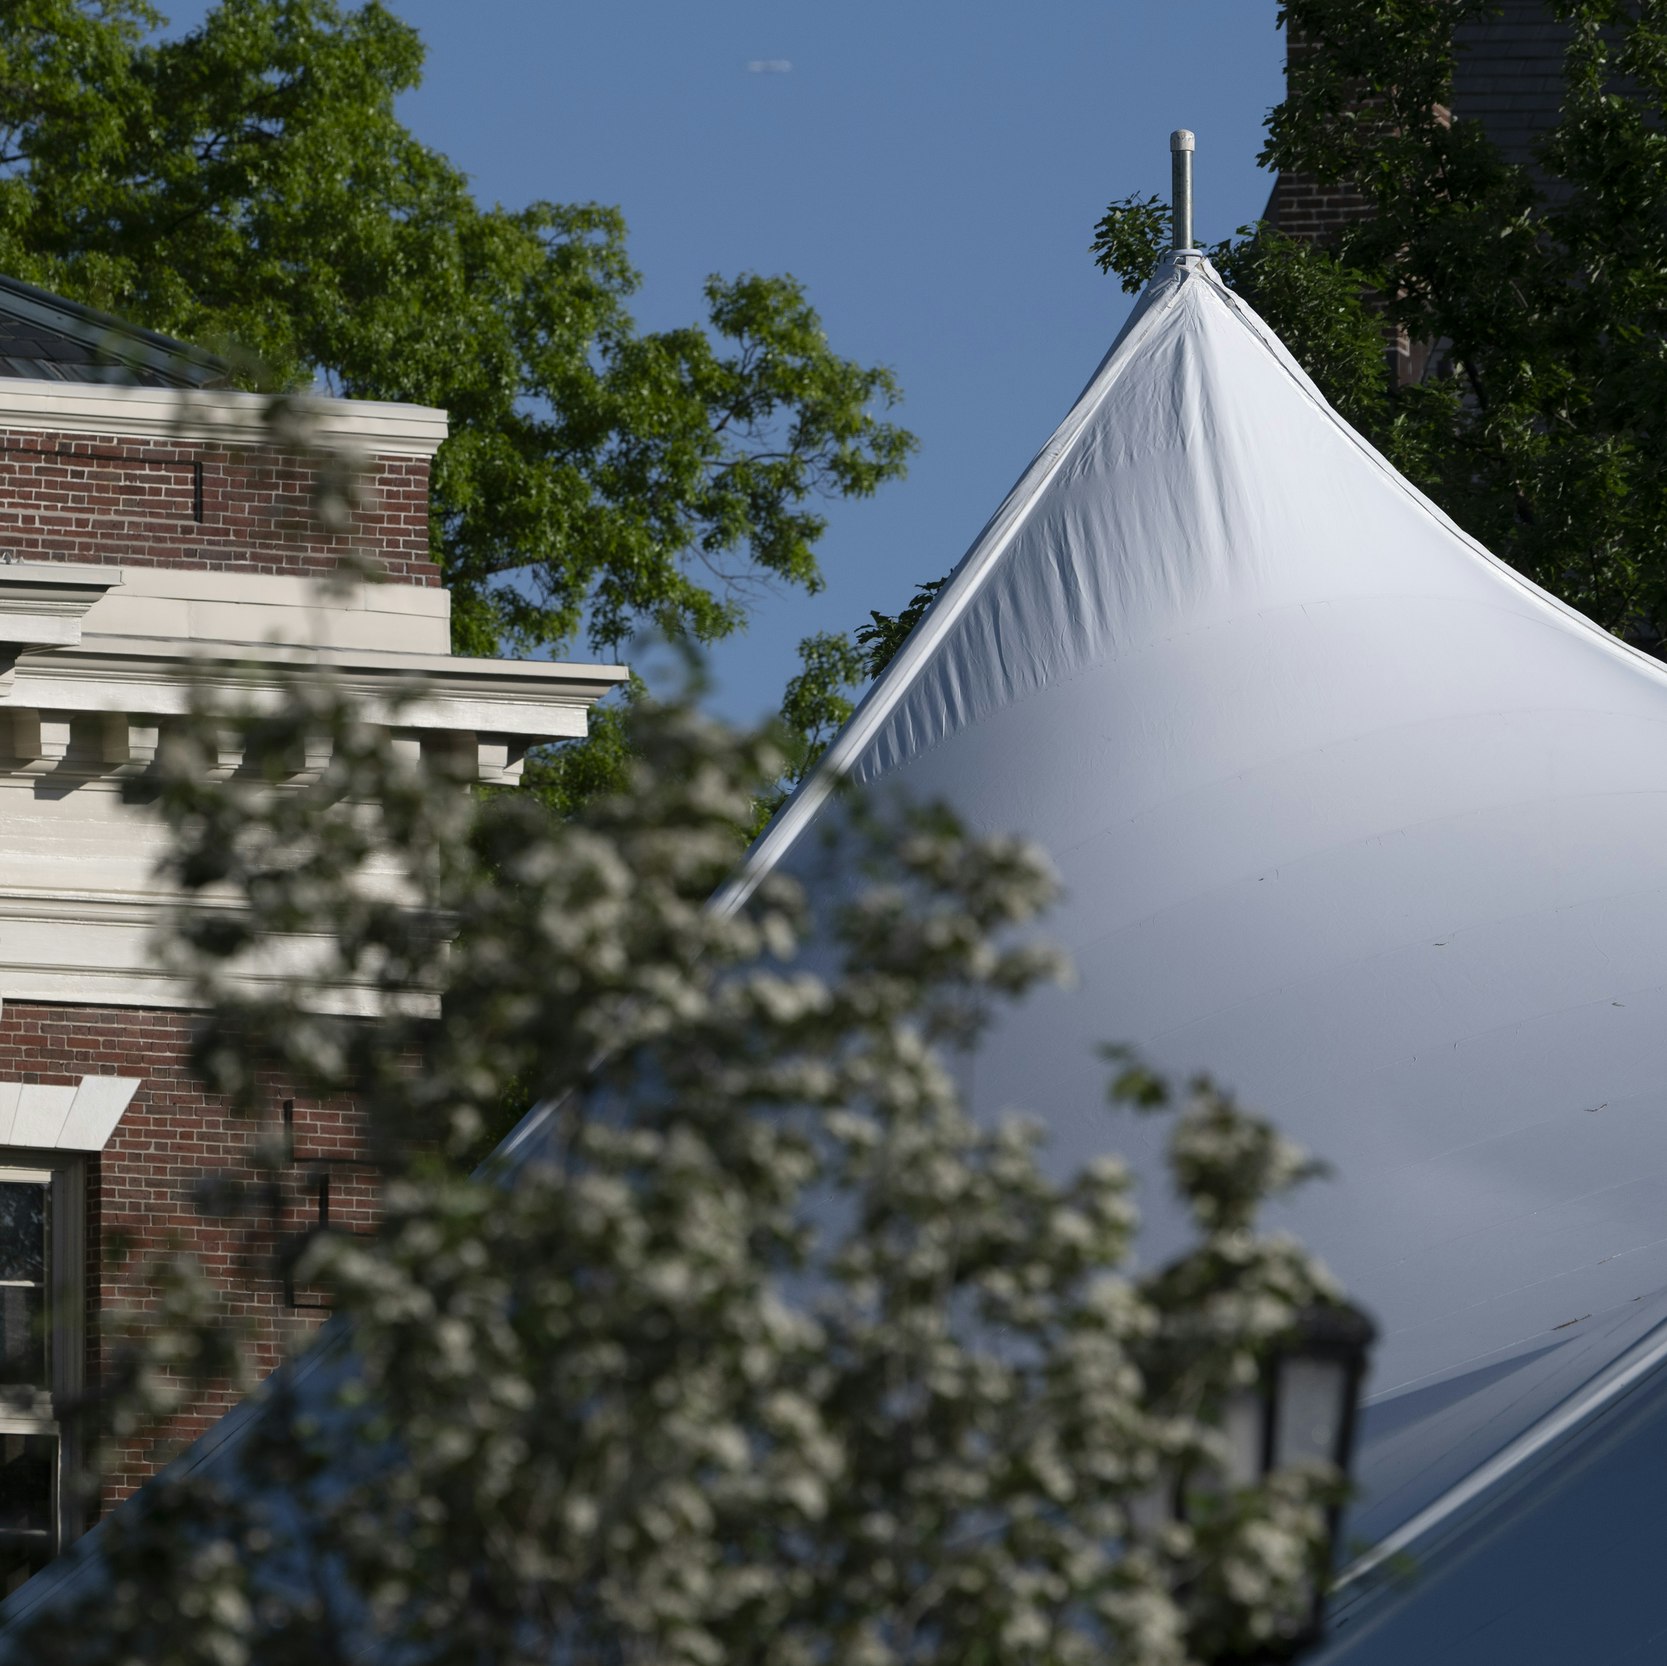 A big white party tent seen through the trees under blue skies.